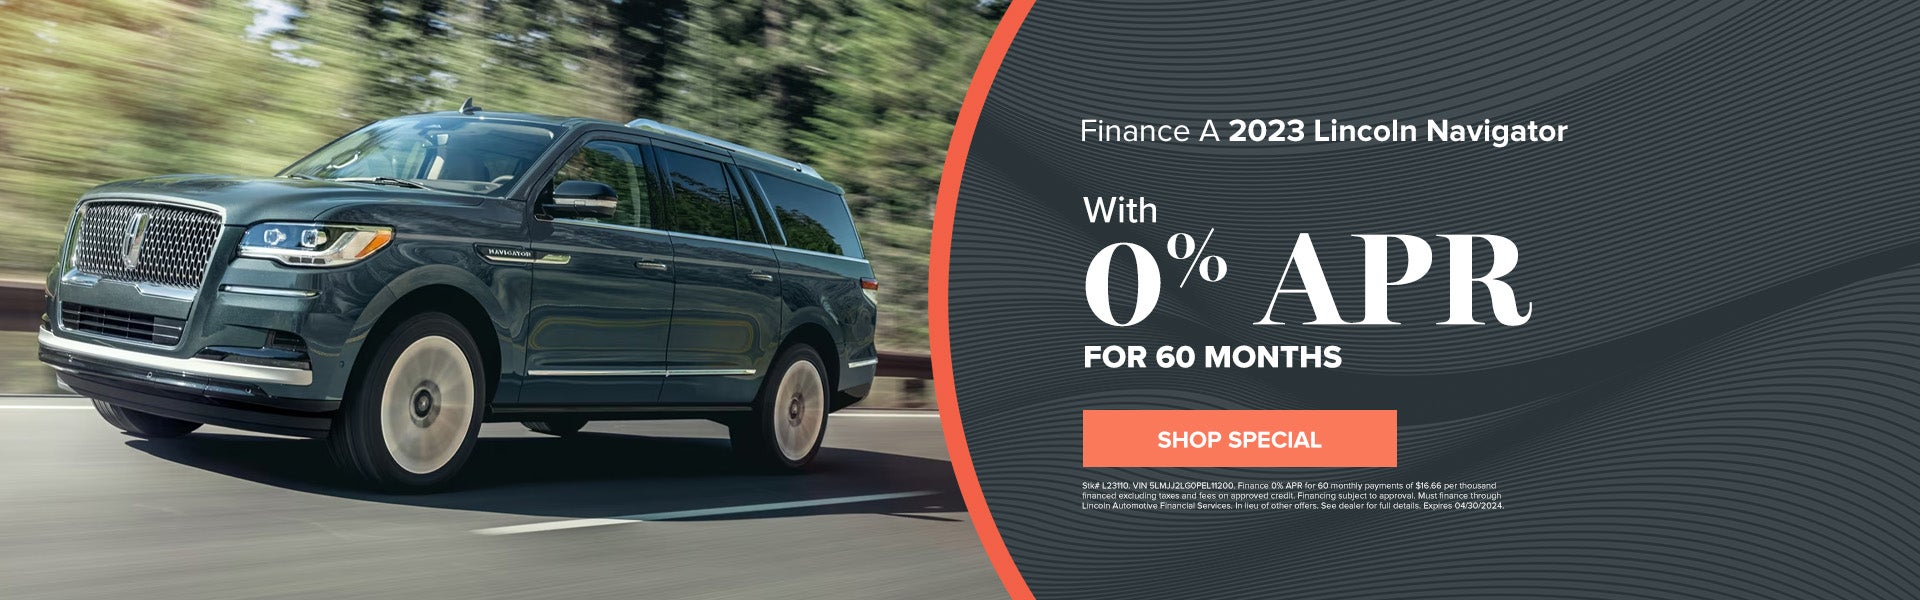 Finance A New 2023 Lincoln Navigator With 0% APR For 60 Mo